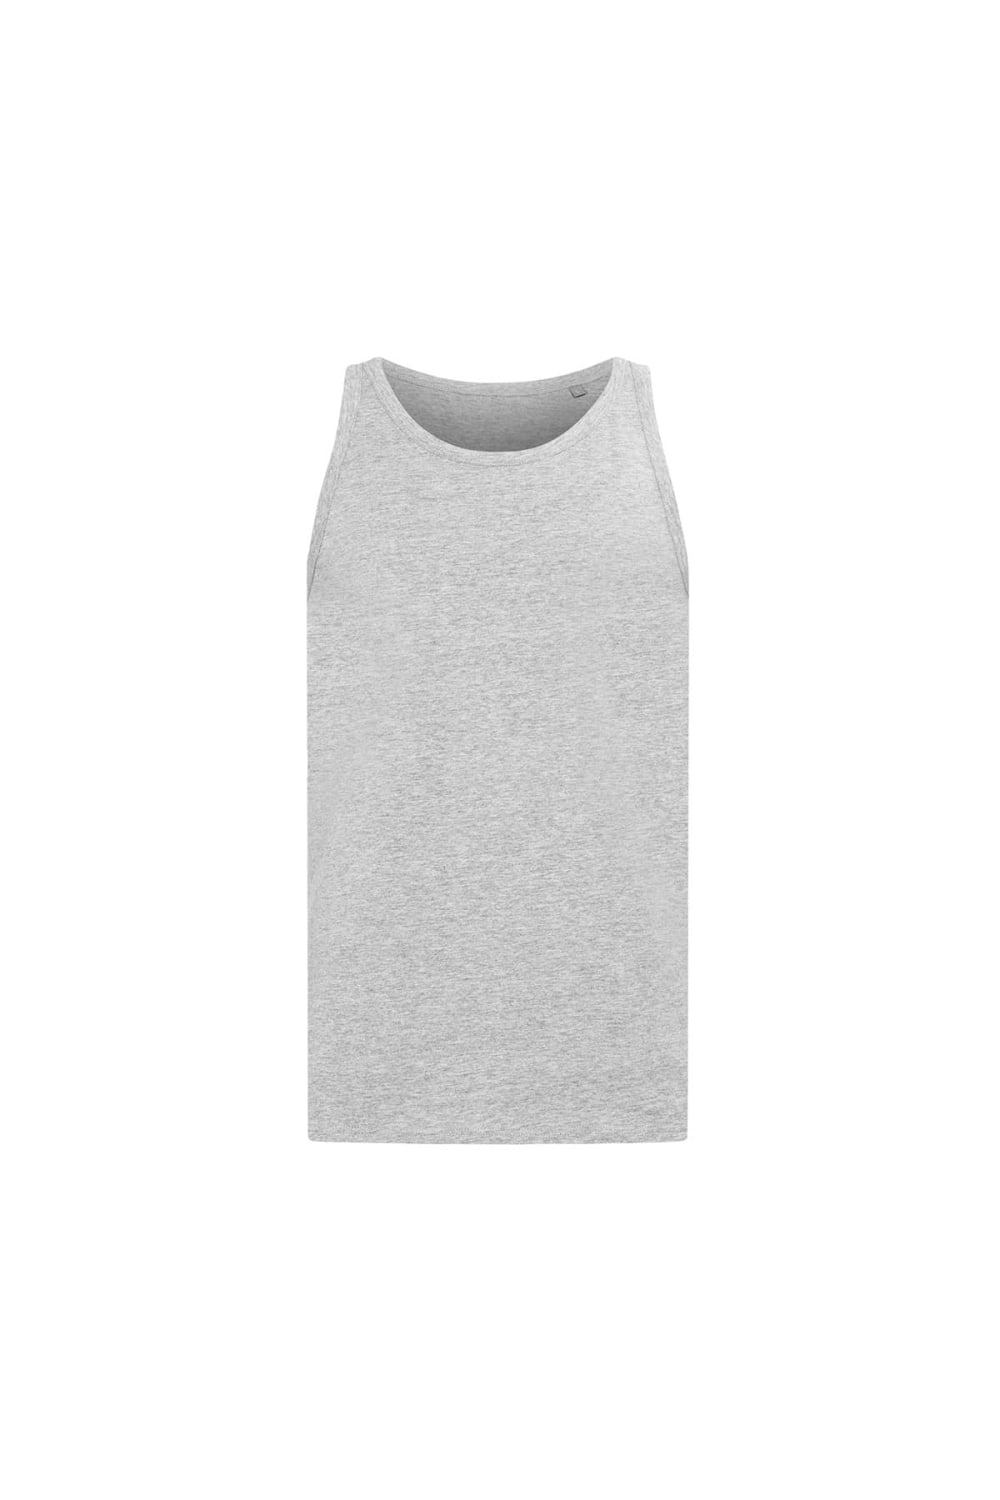 Stedman Mens Classic Heathered Fitted Tank Top (Heather)